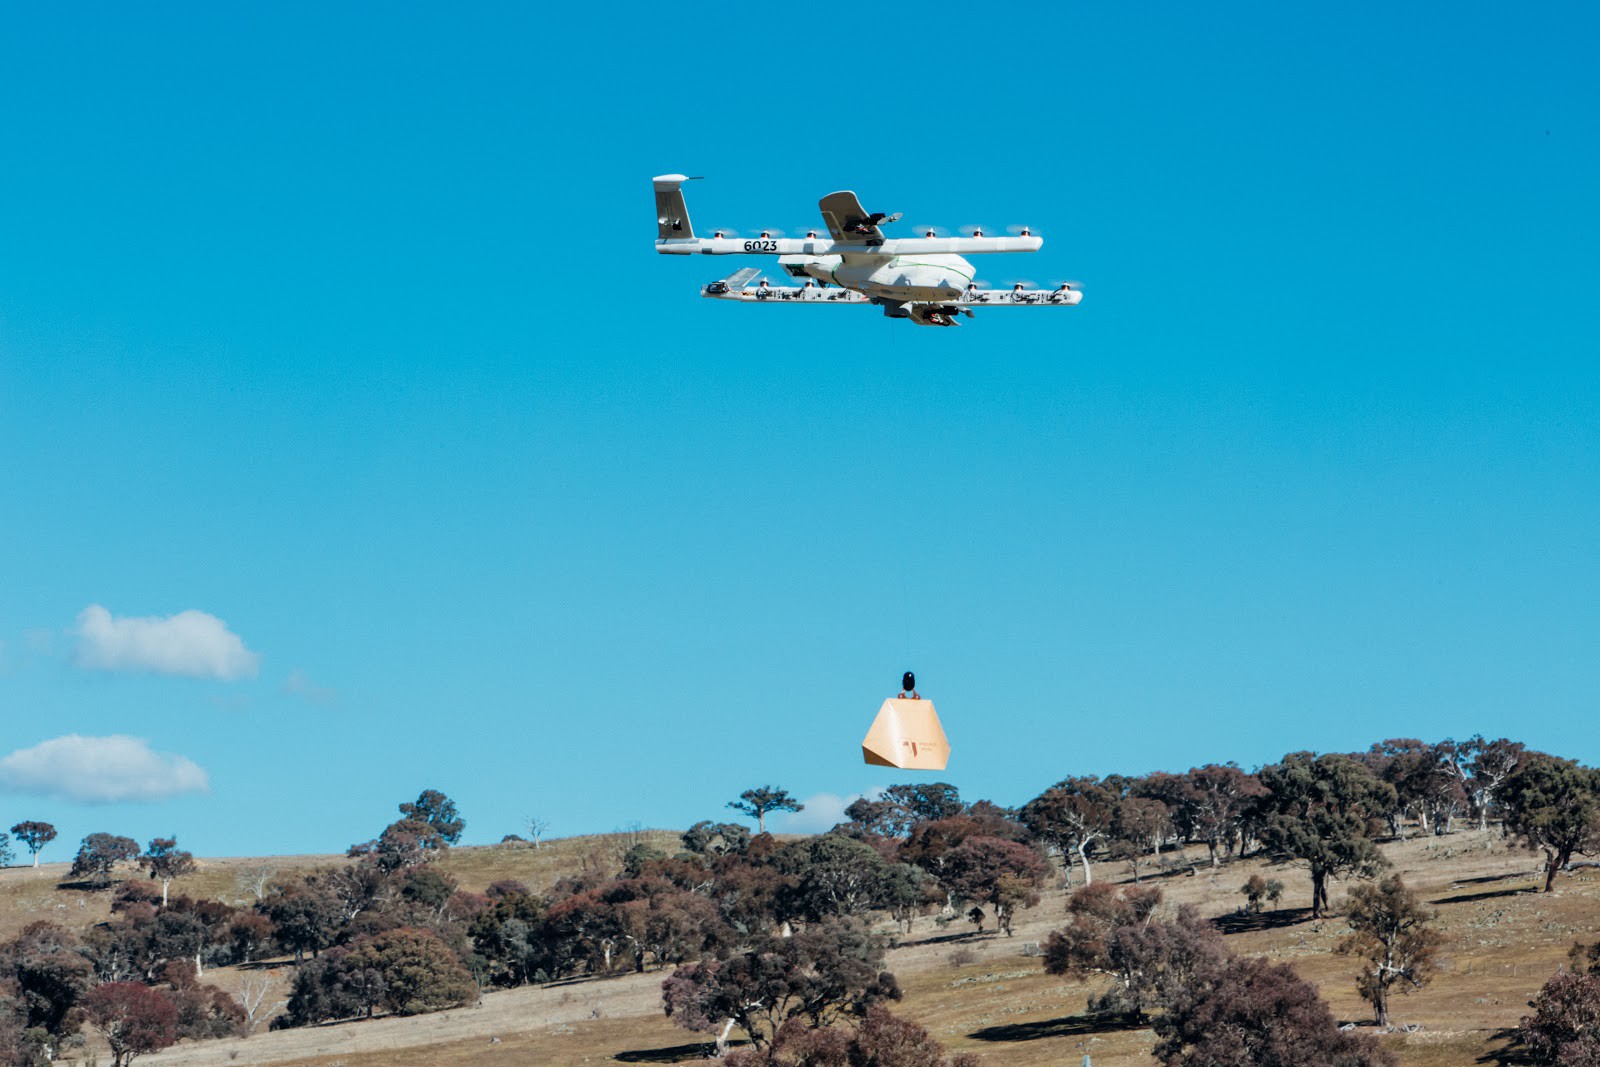 PHOTO: A Project Wing drone delivers a burrito in Queanbeyan, Australia in an undated image posted to the X blog on Oct. 16, 2017.